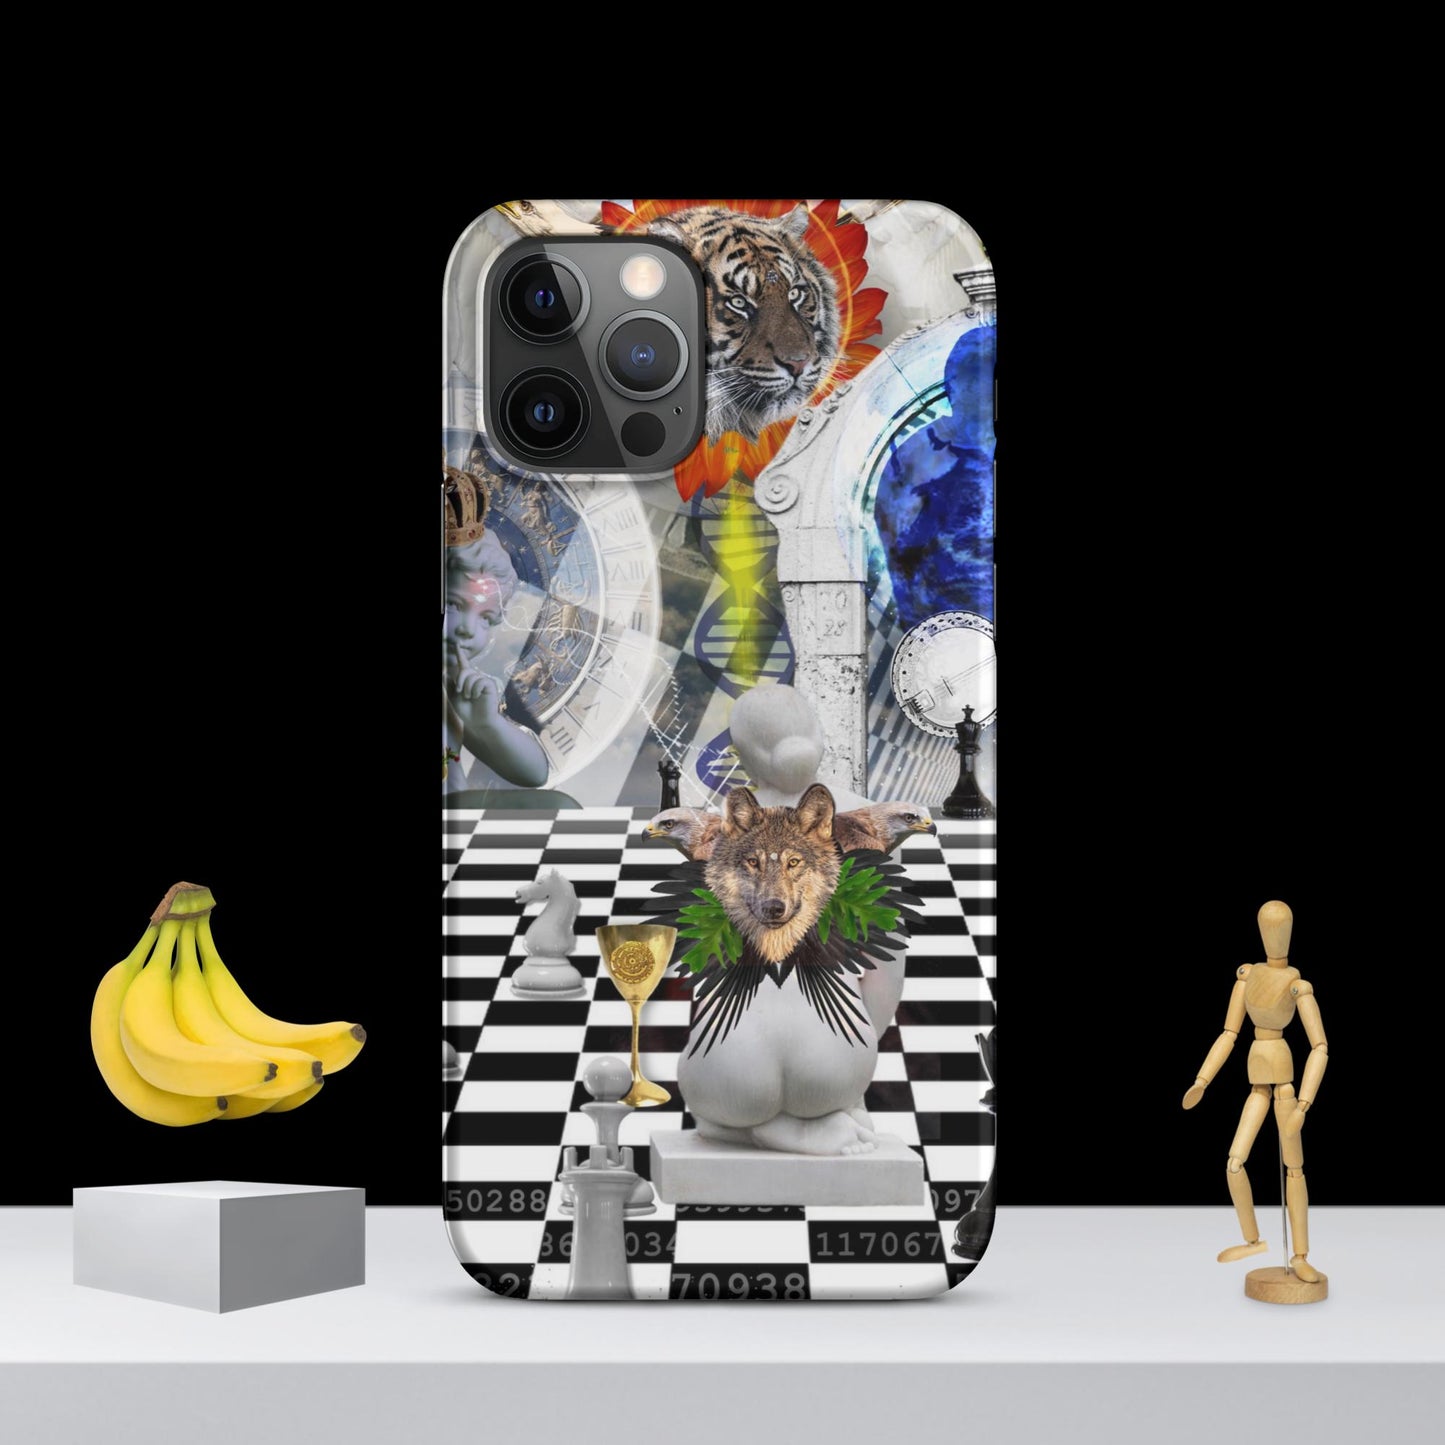 2 of Cups - Snap case for iPhone®  - Custom Design - Beacon of Hope and Light Artworks